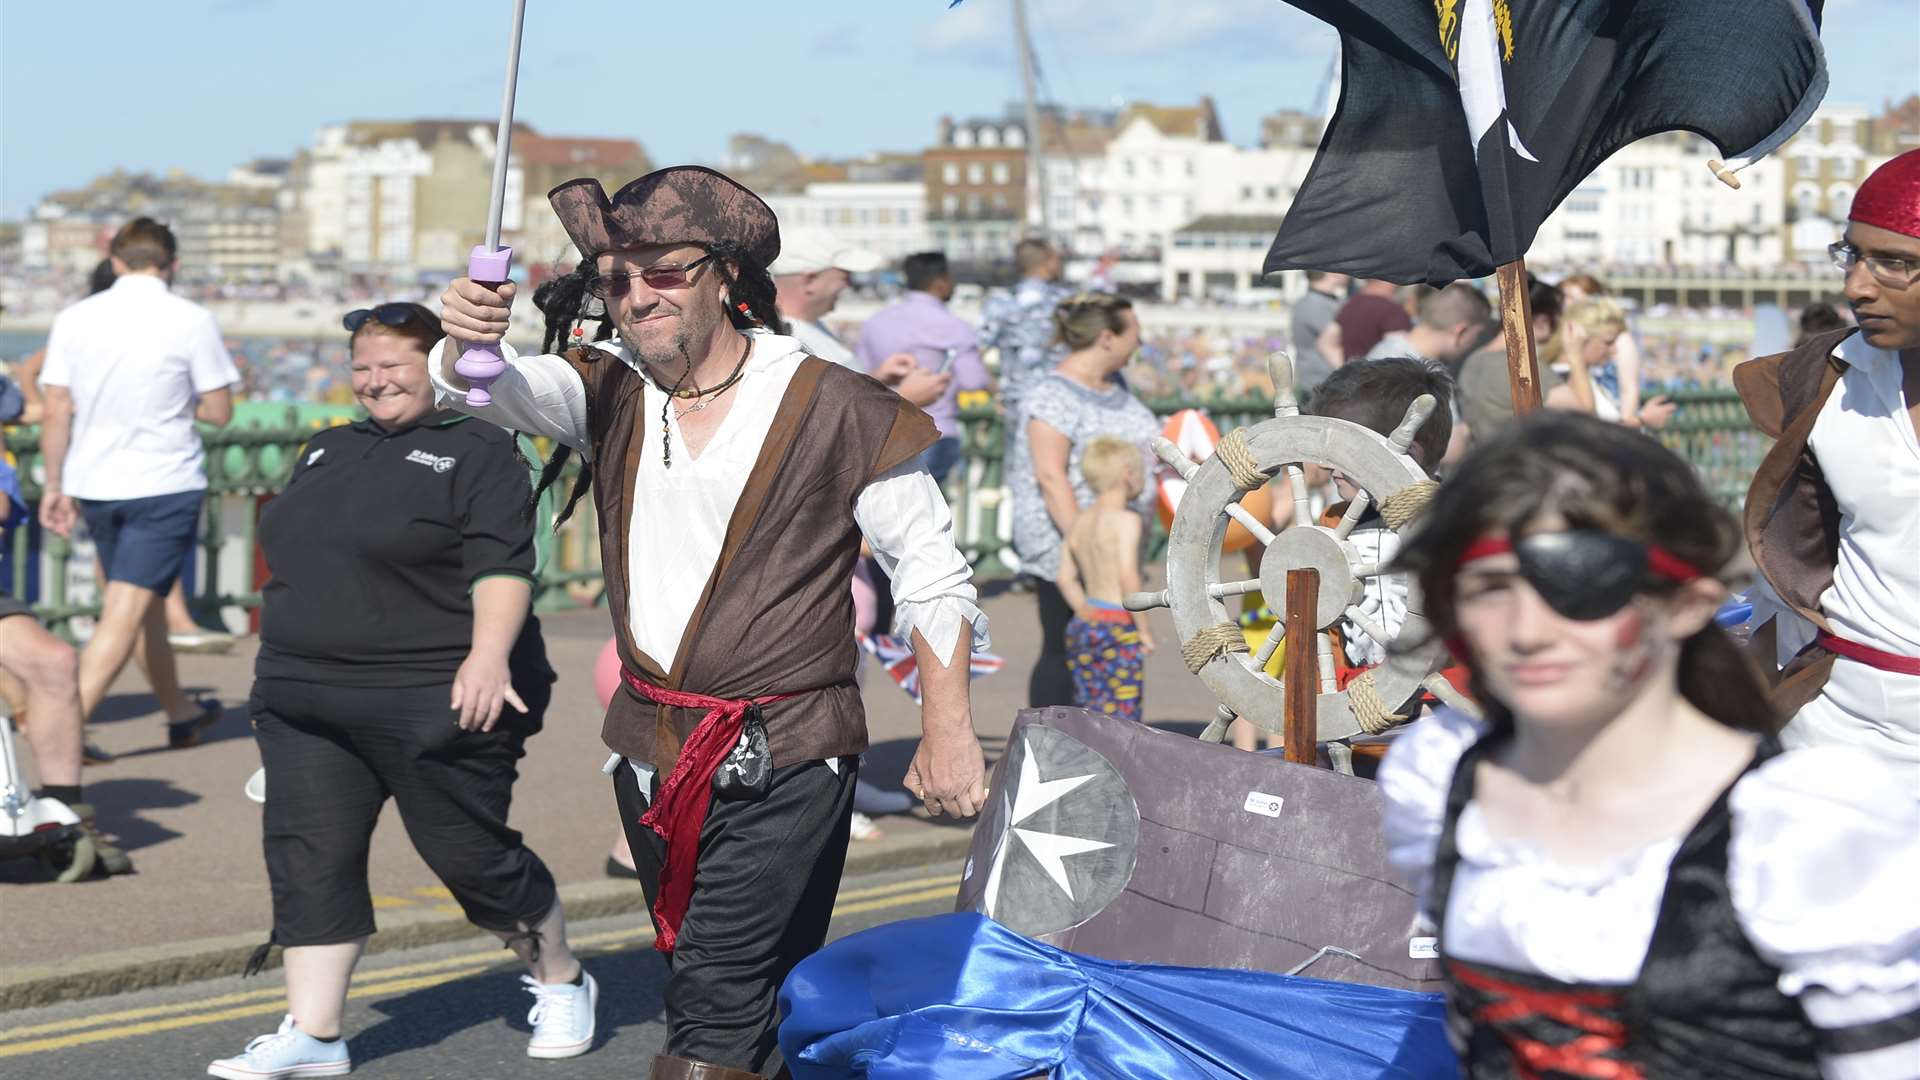 Last year at Margate carnival